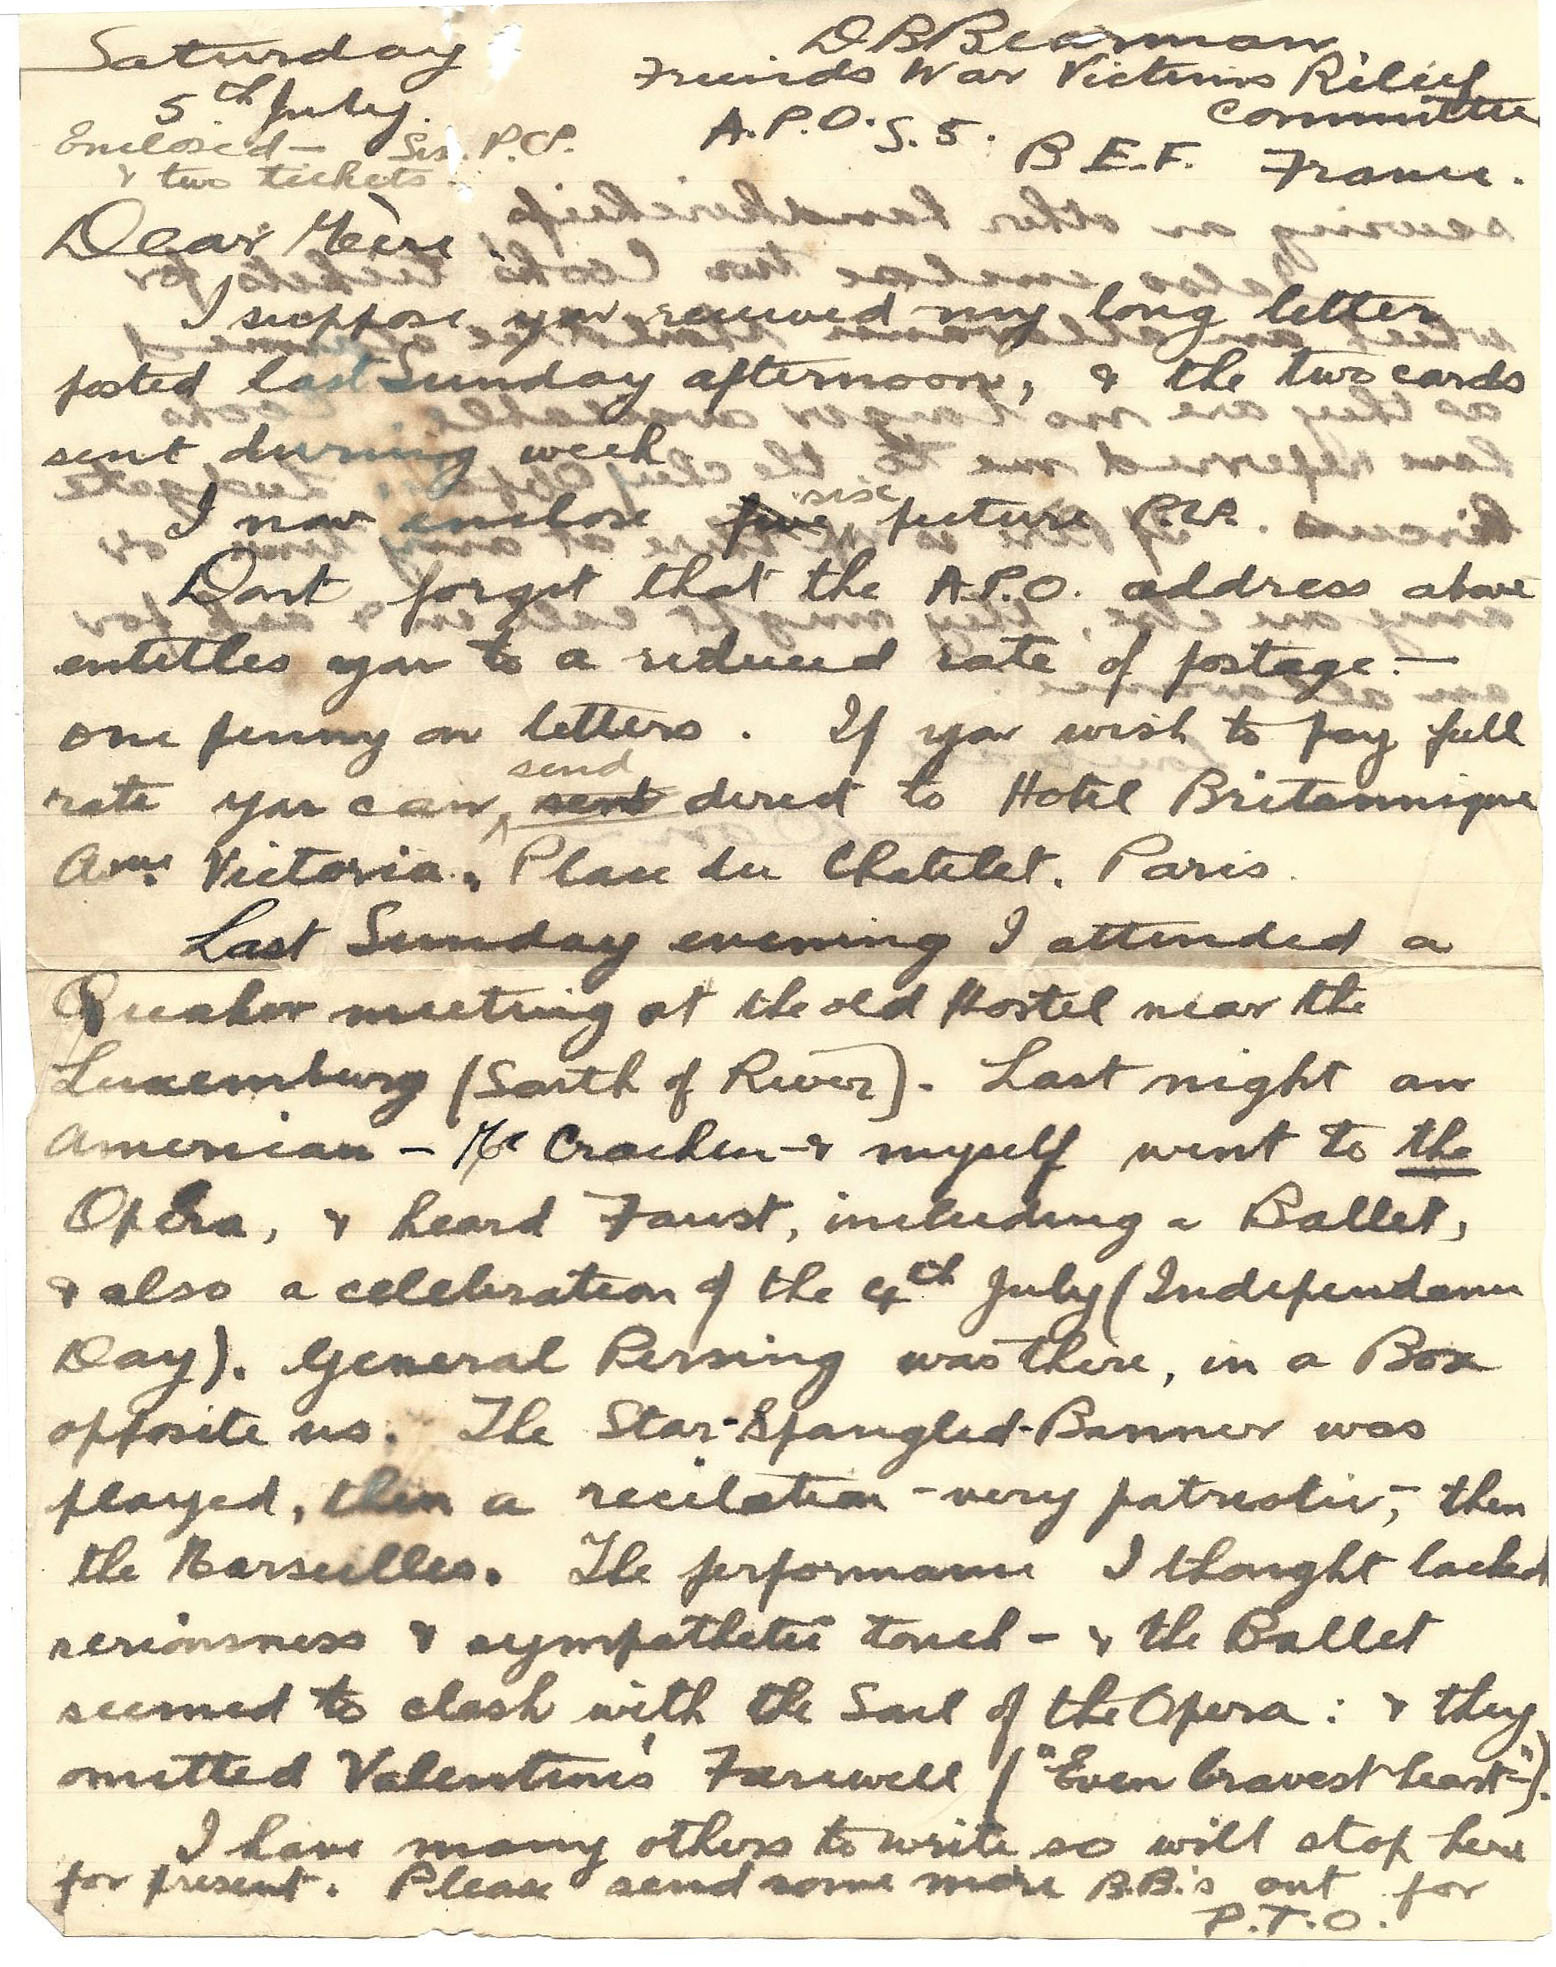 1919-07-05 p1 Donald Bearman letter to his father